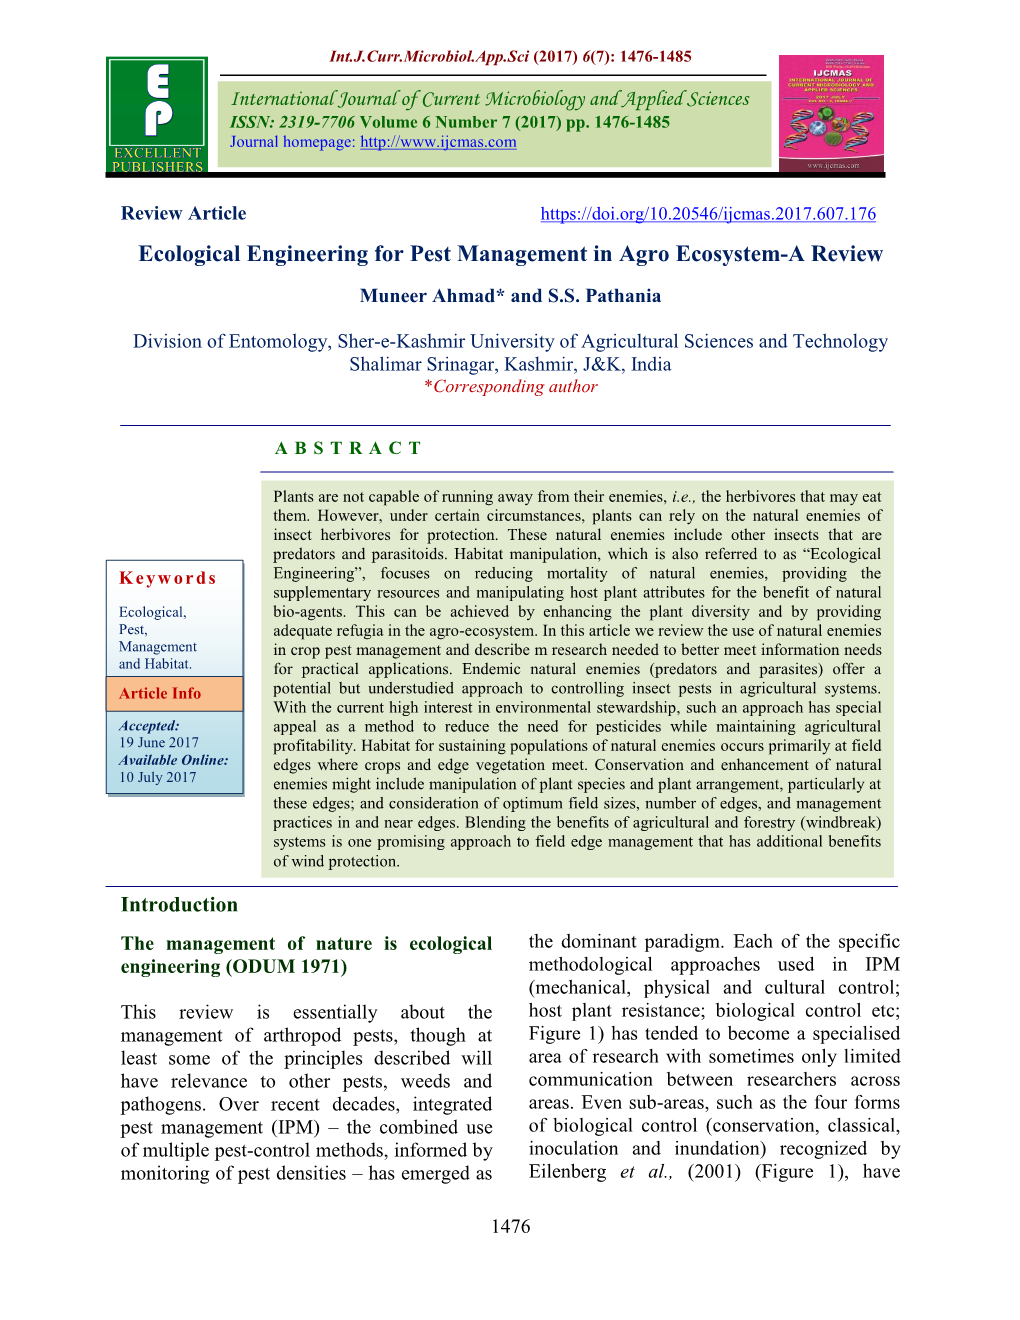 Ecological Engineering for Pest Management in Agro Ecosystem-A Review